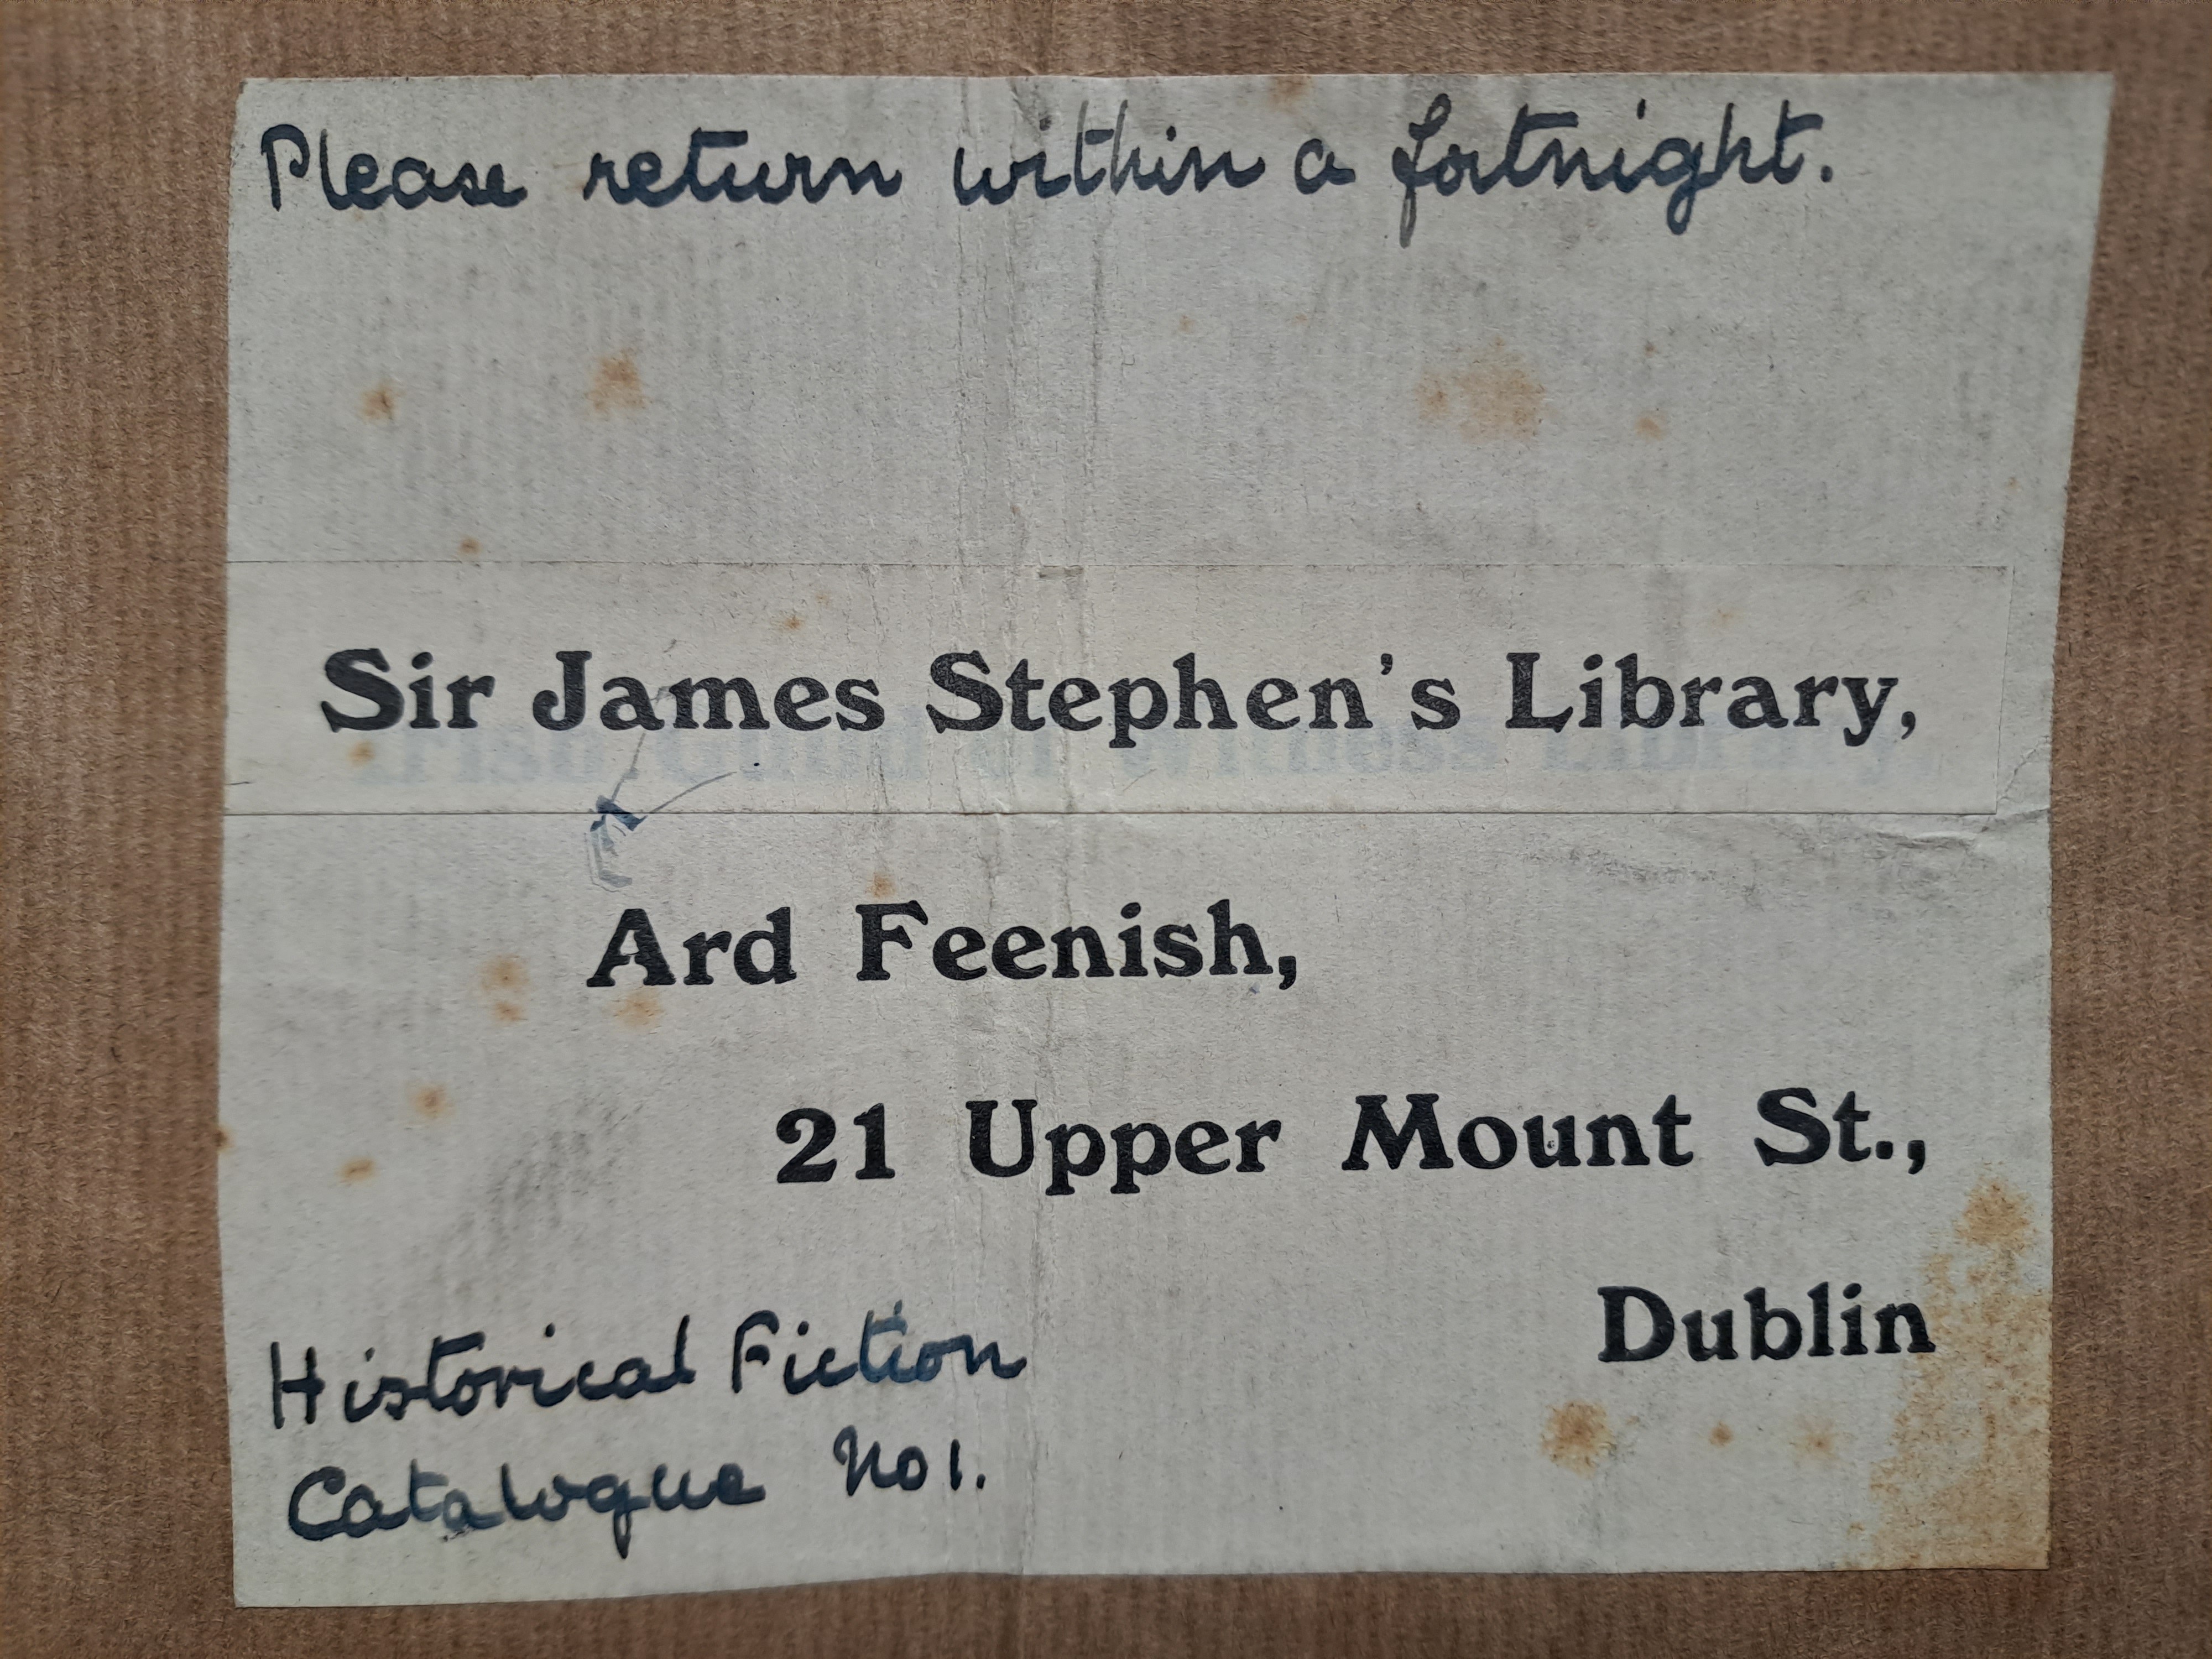 An example of one of the earlier fiction titles available in the Guild of Witness Library. These titles were part of the Sir James Stephen's Library, and were specifically organised according to genre.